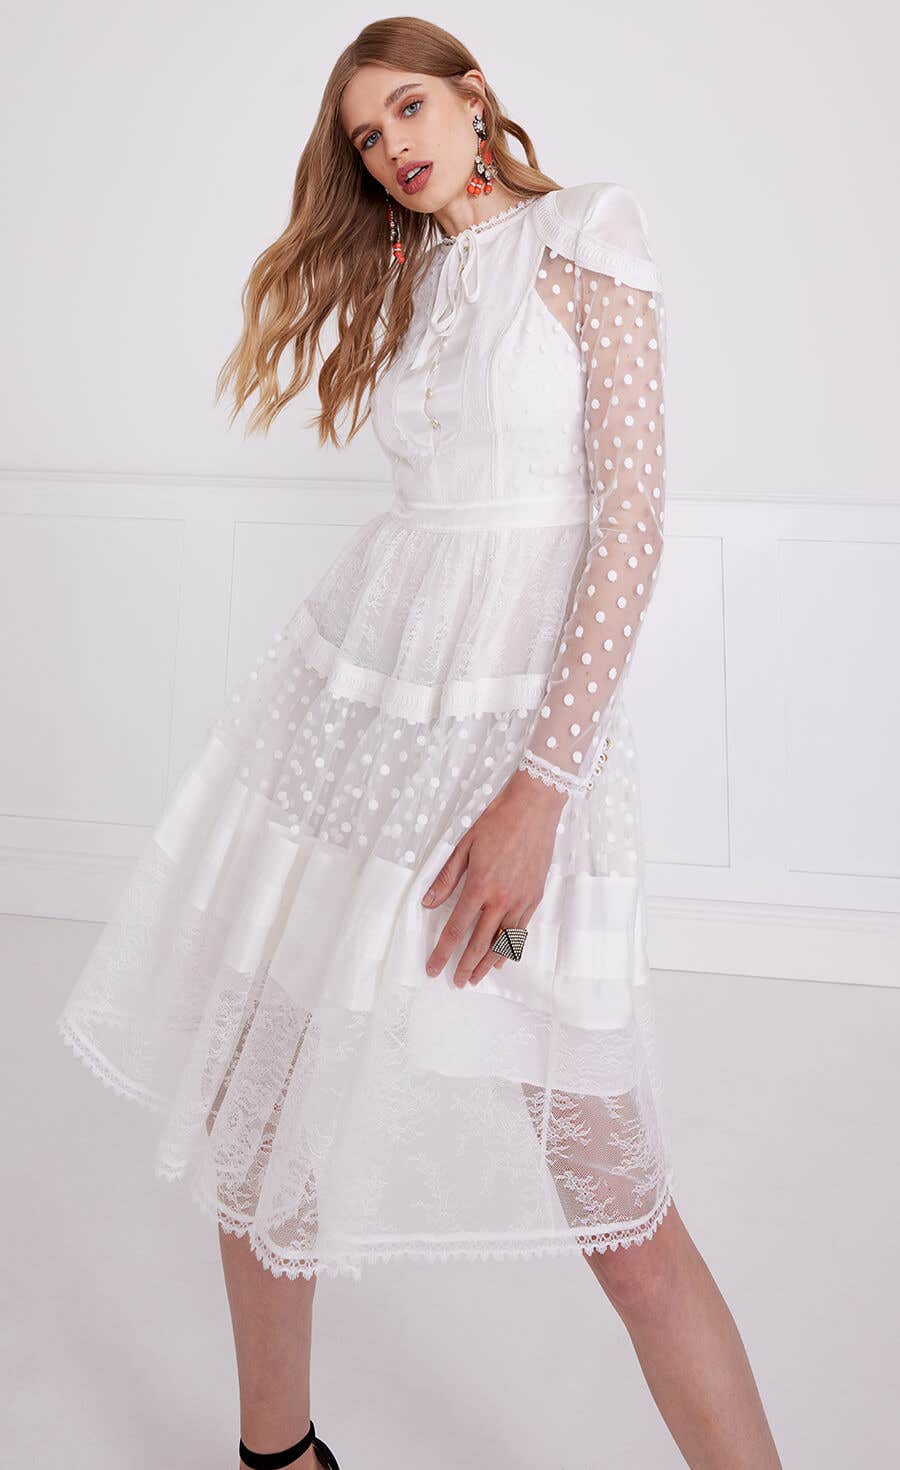 Marlow Sleeved Dress - White | Dresses and Jumpsuits | Temperley London ...